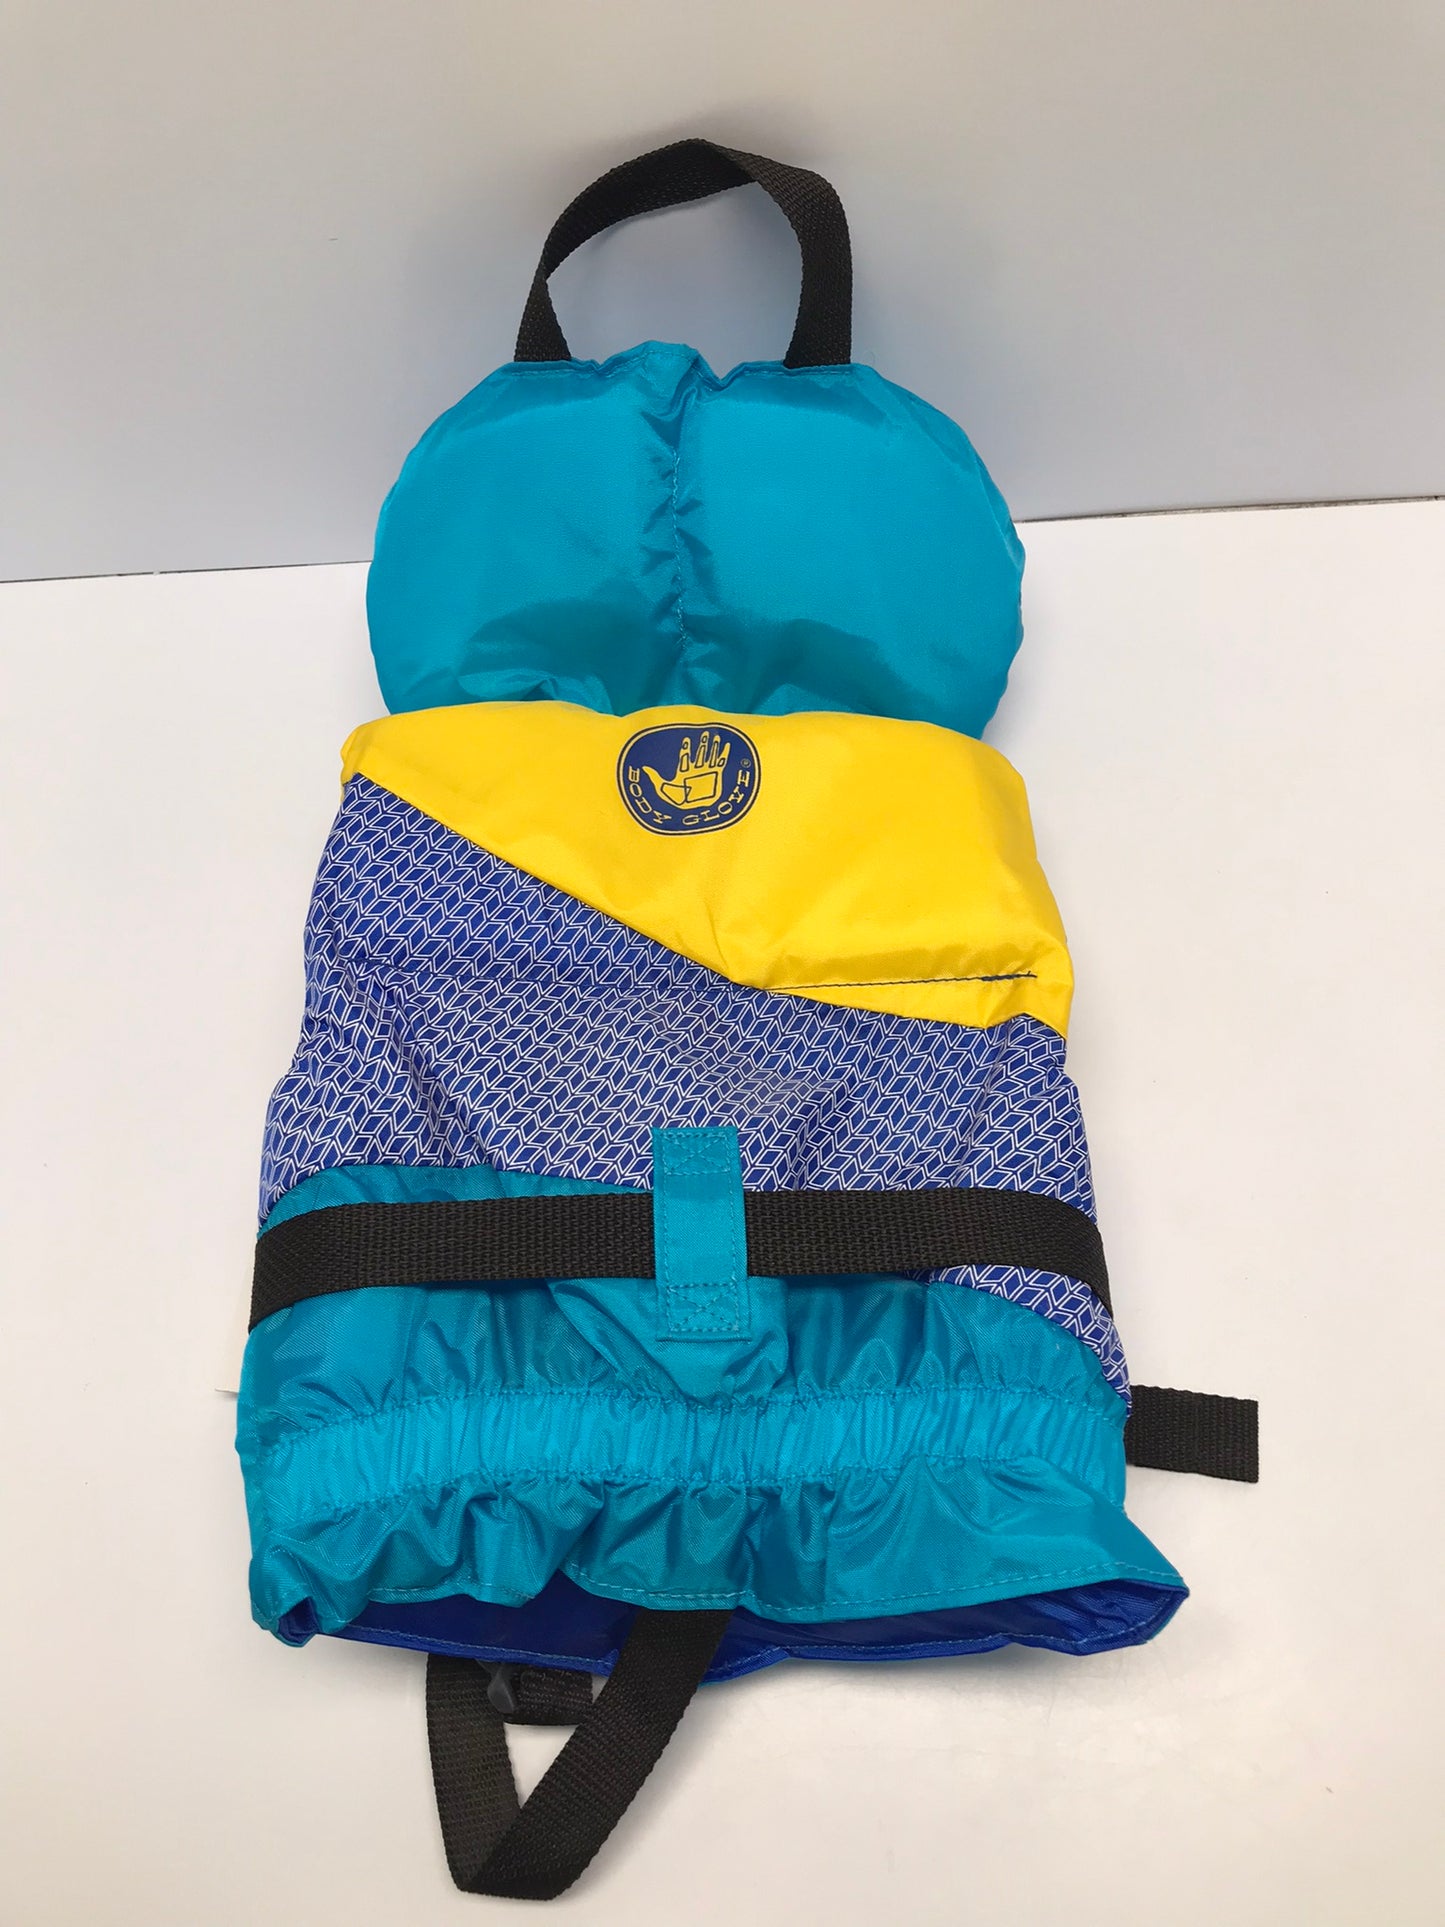 Life Jacket Vest Infant Baby Size 20-30 Body Glove New With Tags Transport Canada Approved